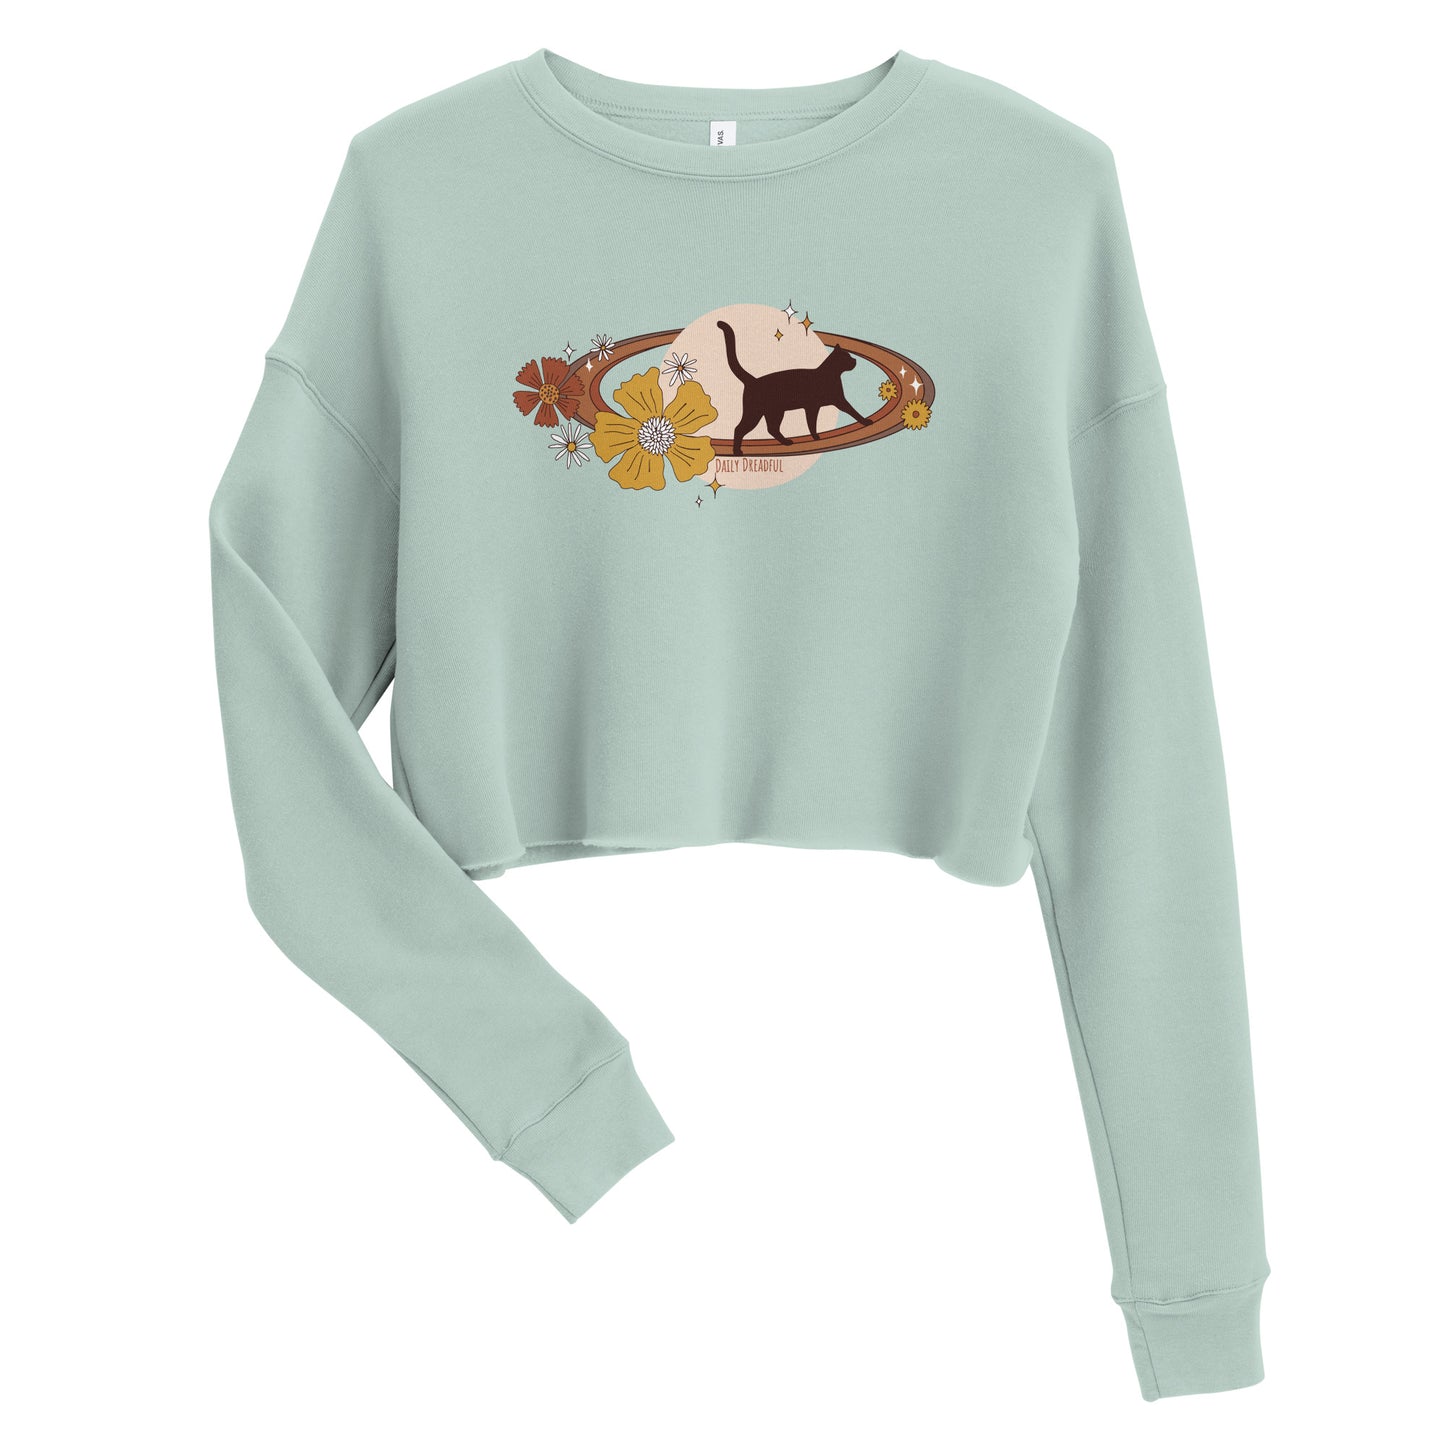 dusty blue colored "Space Kitty" crop sweatshirt from Daily Dreadful